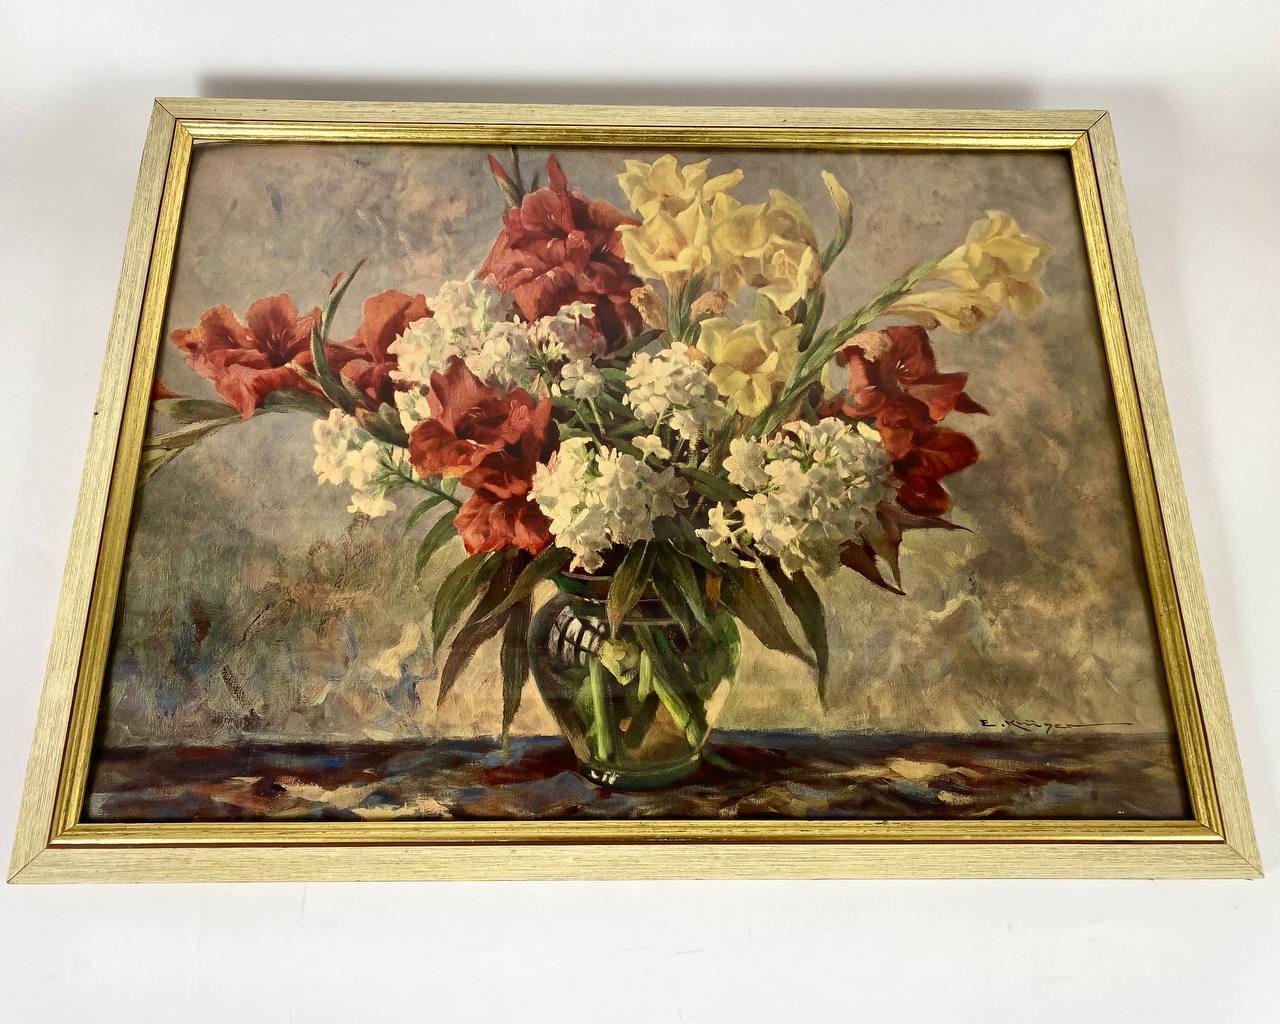 Vintage Framed Watercolor Painting «Gladiolus and Phlox» by German artist Erich Kruger (1897-1978). 

Original authentic watercolor depicting bouquet of Gladiolus and Phlox in the vase. The work is framed in a classic gilt wooden frame. The color